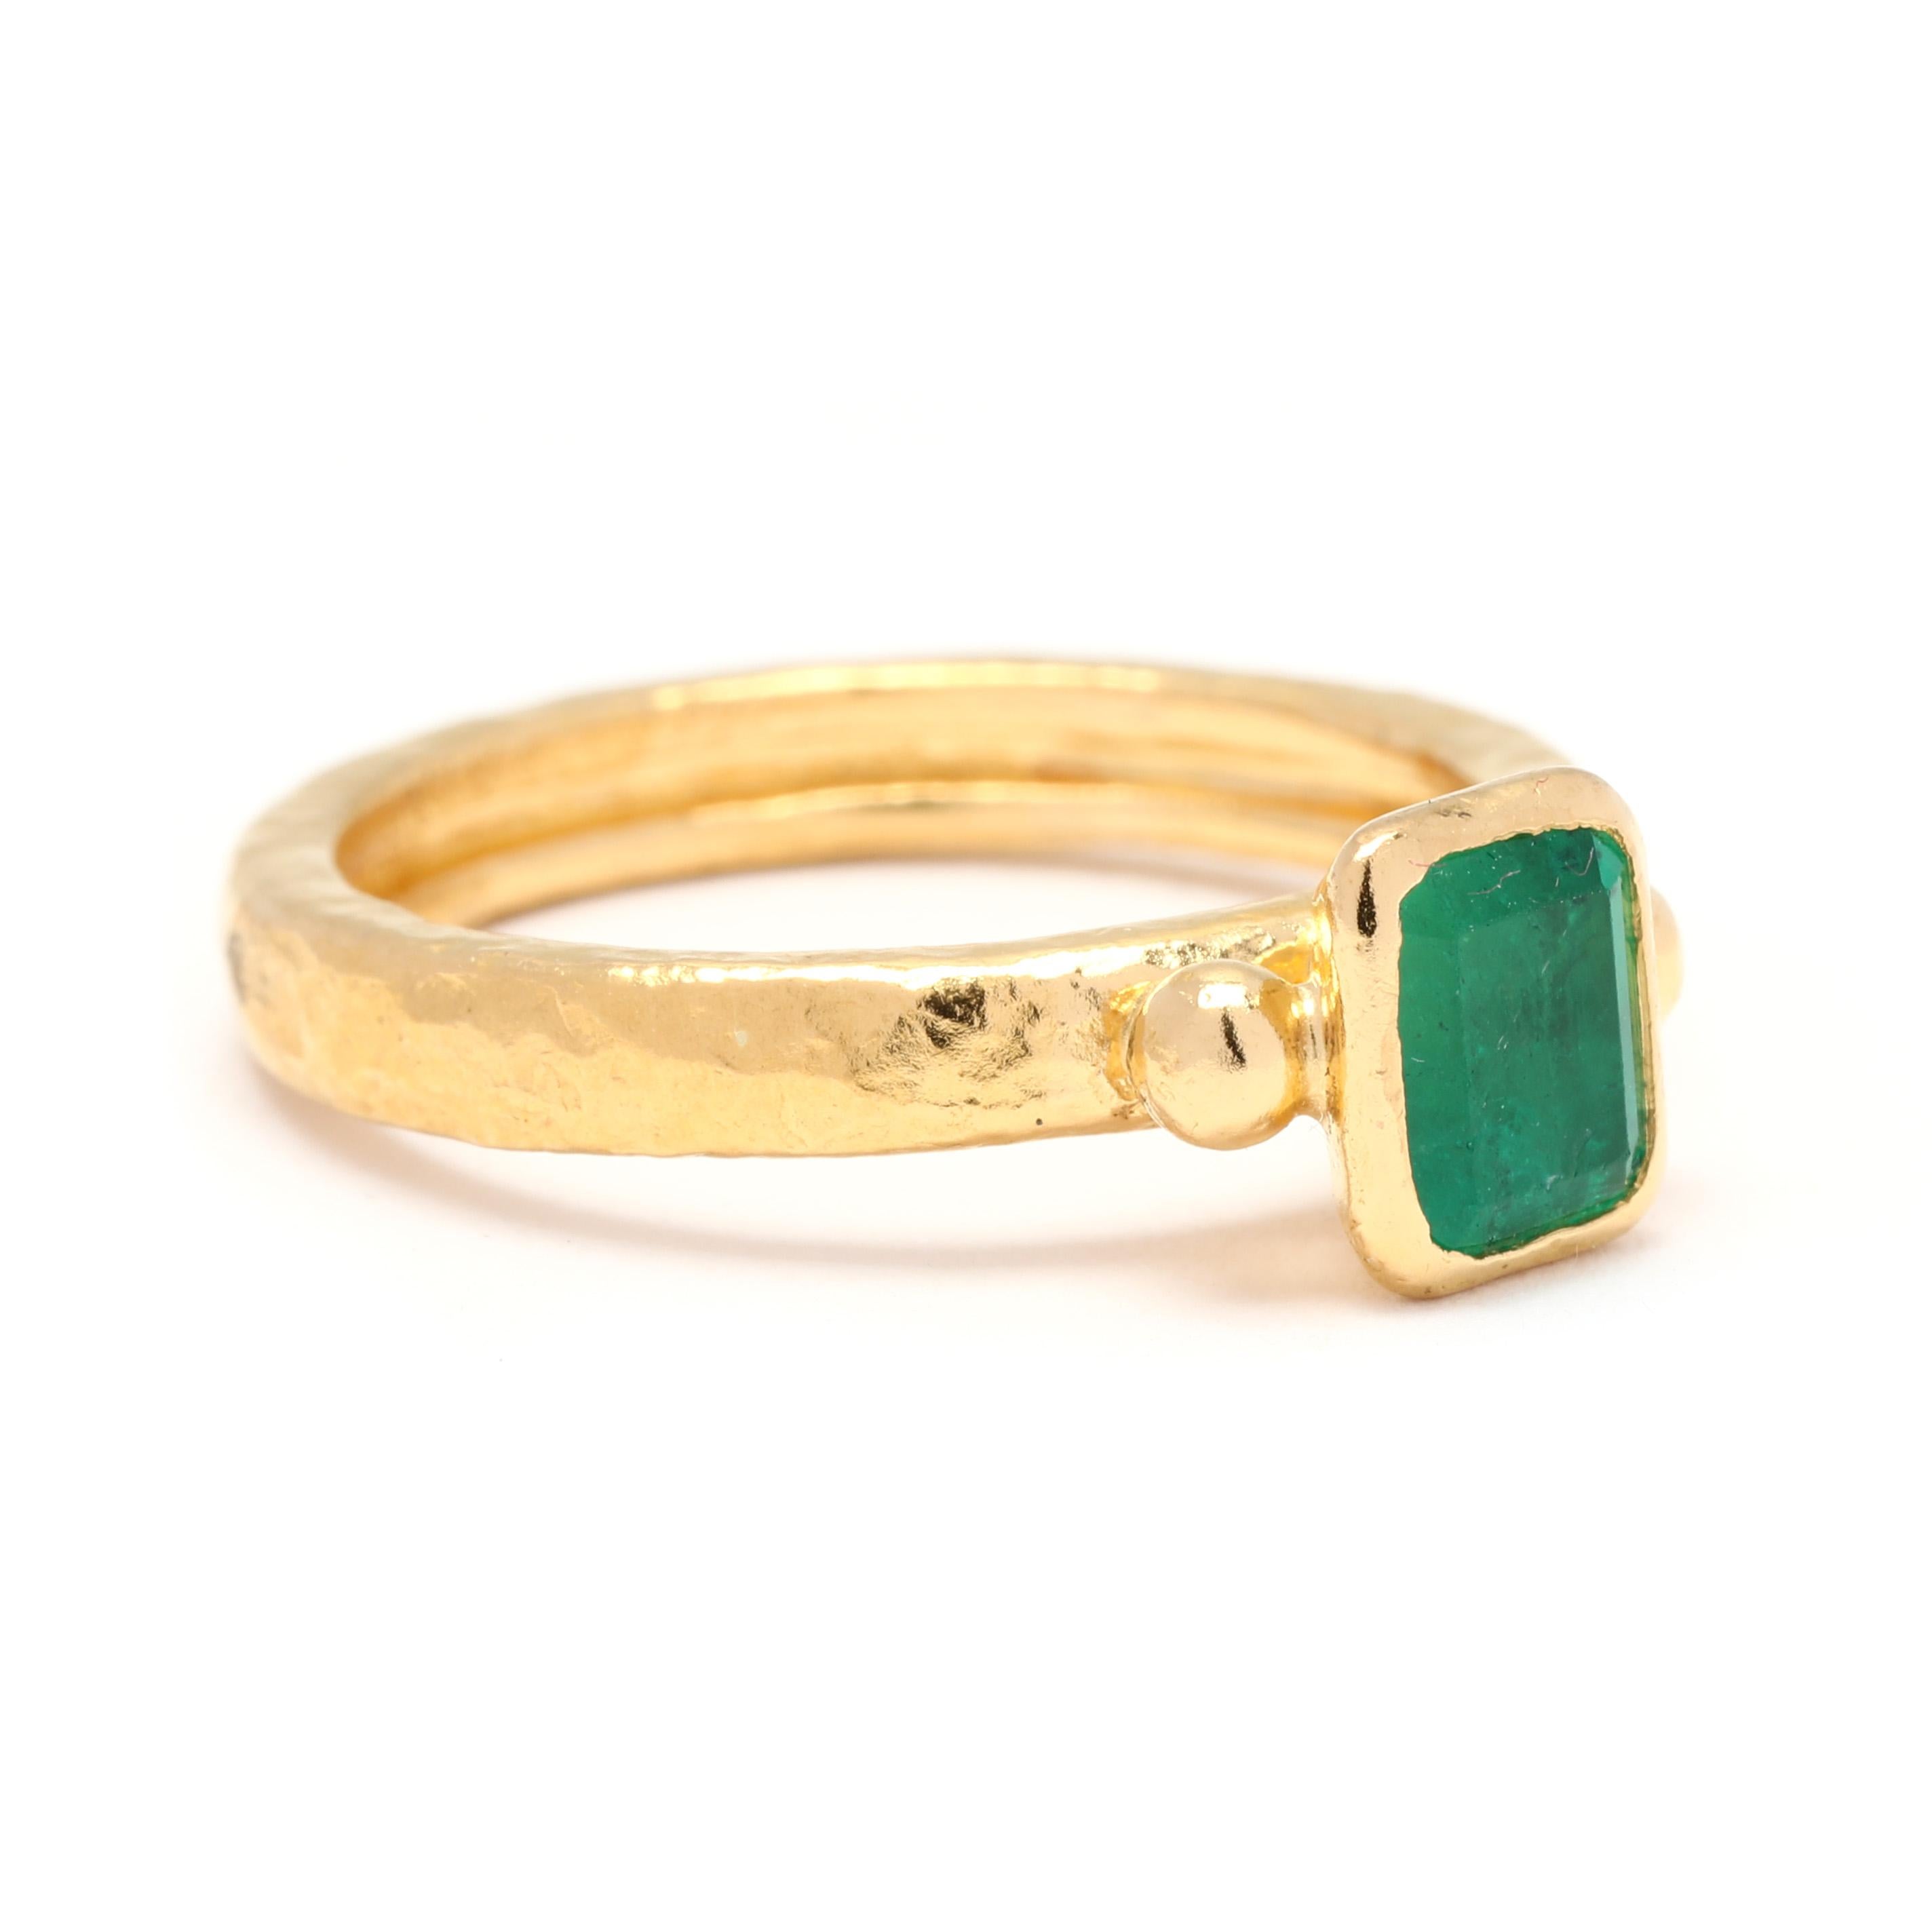 This gorgeous emerald engagement ring by Gurhan is a true masterpiece. Crafted from 24K yellow gold, this ring exudes luxury and elegance. The ring features a stunning emerald stone in a dainty setting, adding a pop of vibrant green color. The